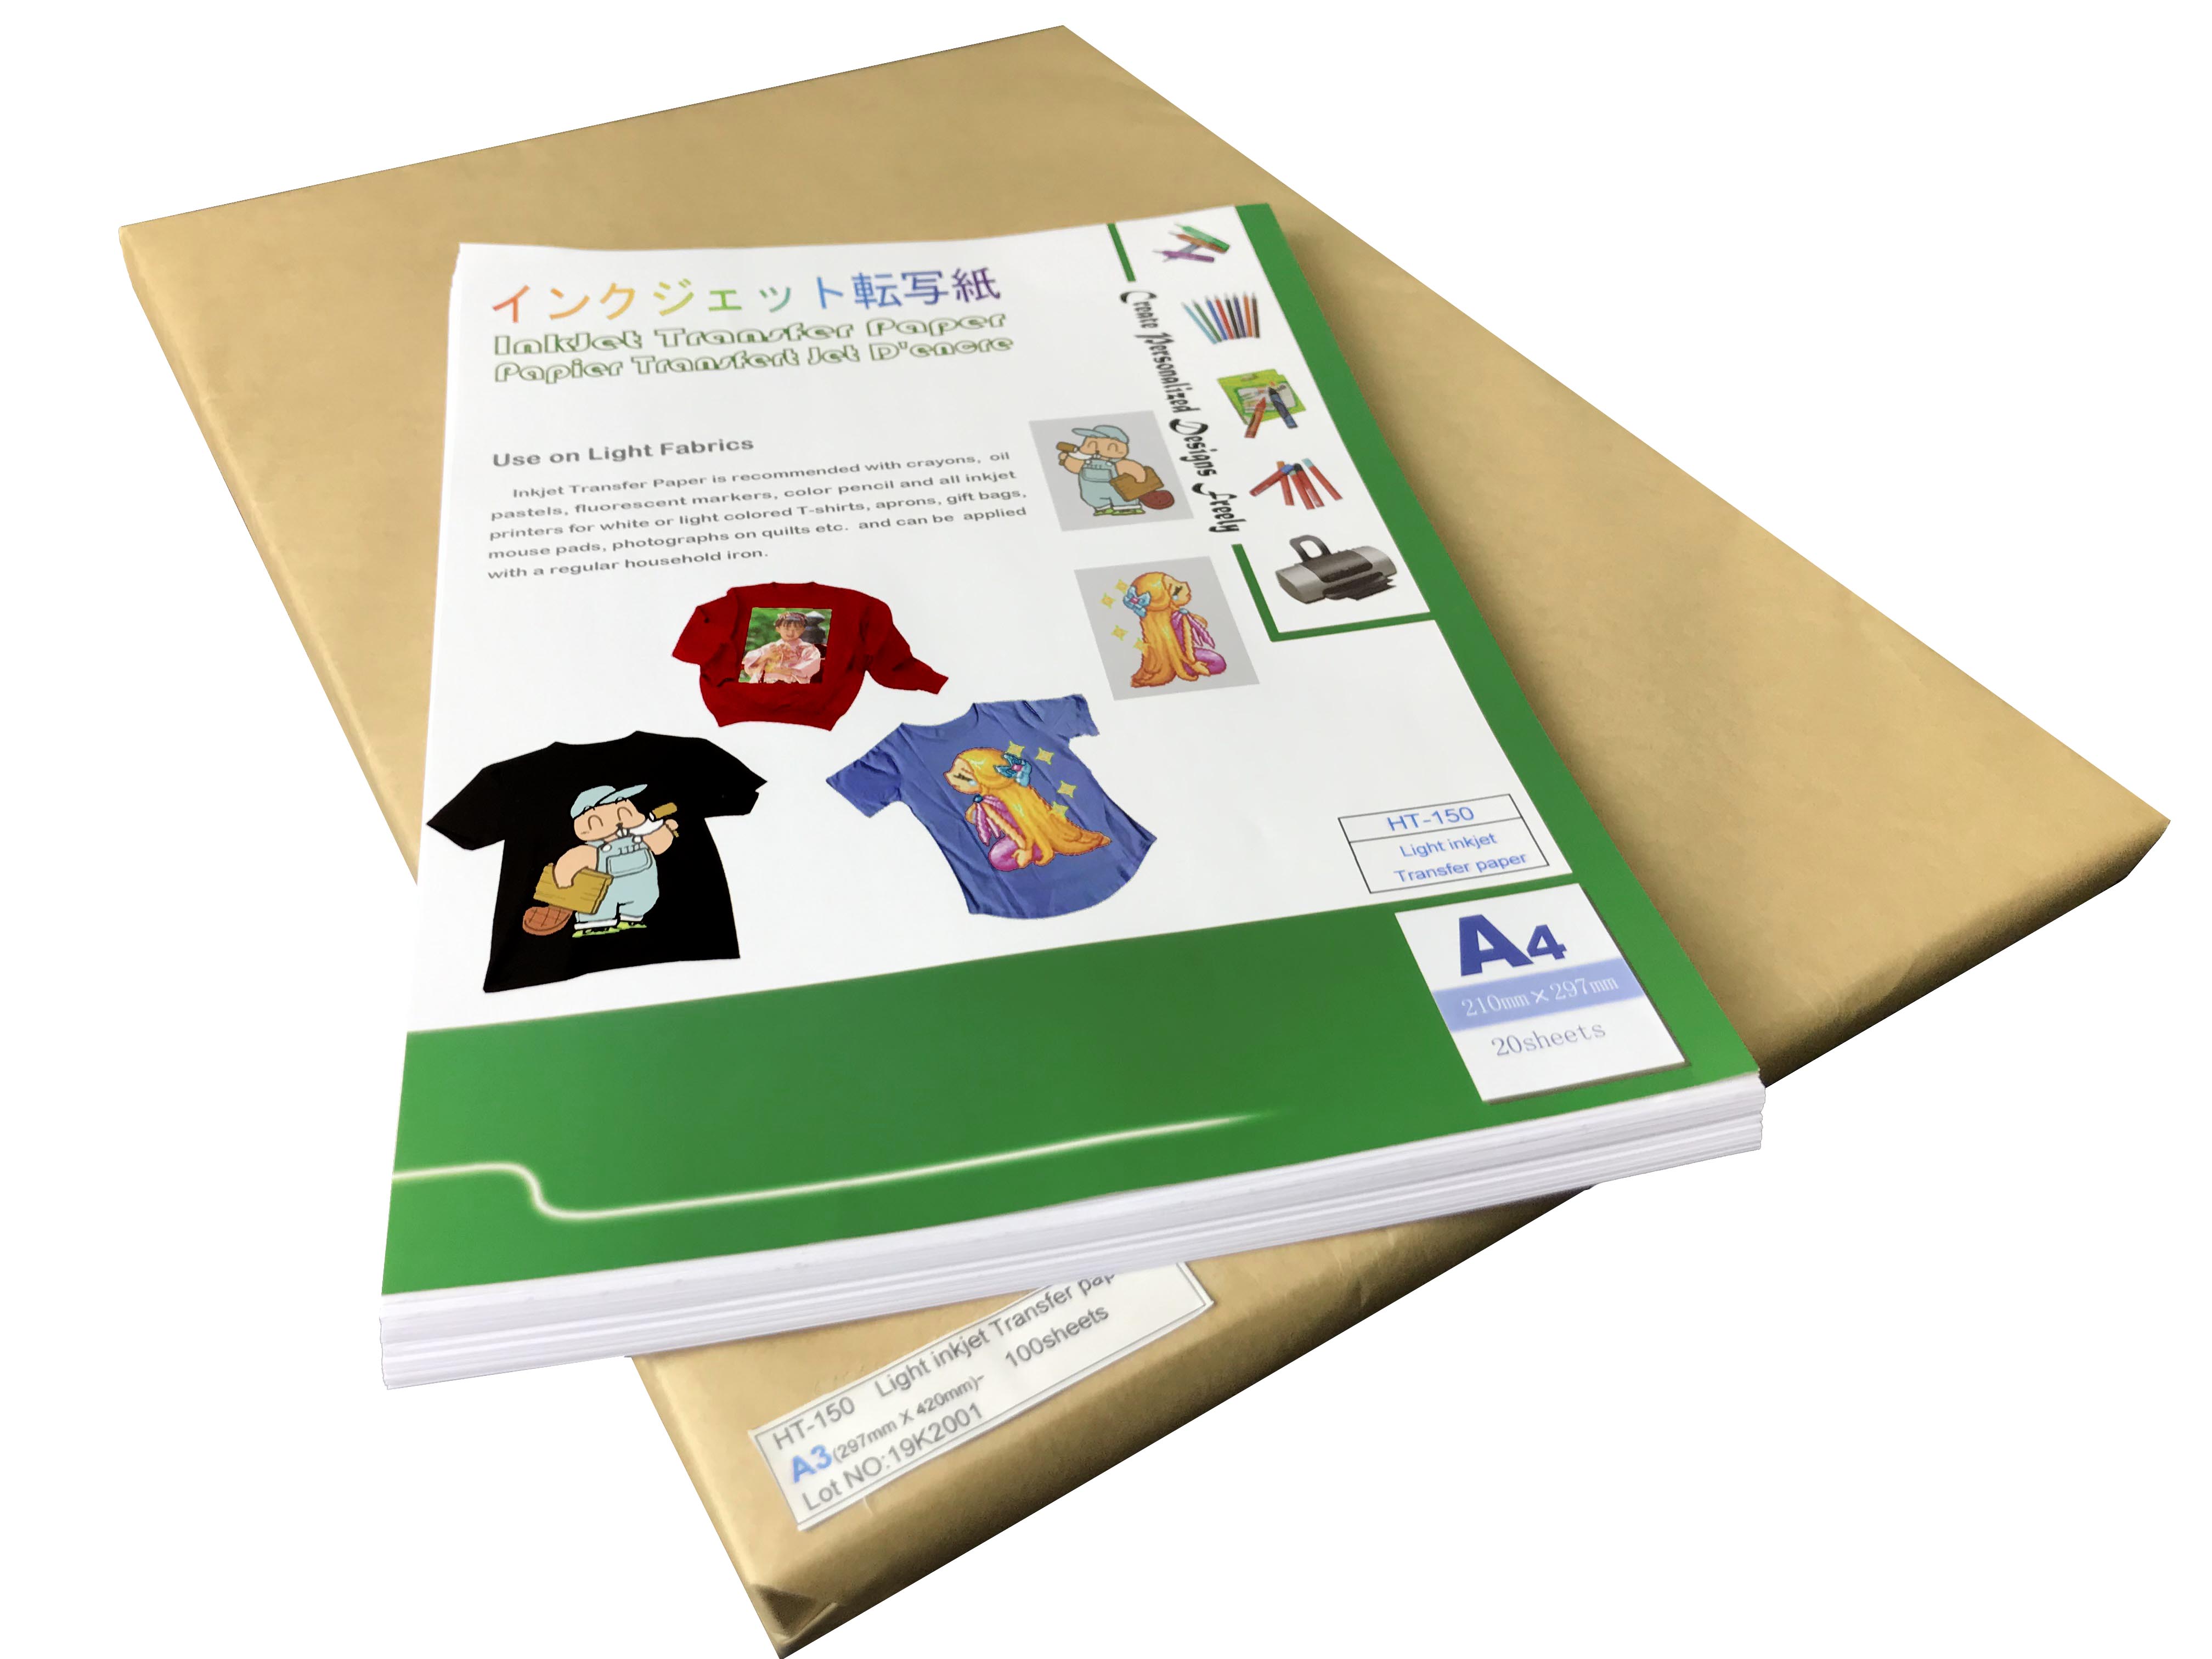 Light T-Shirt Transfers for Ink Jet Printers 